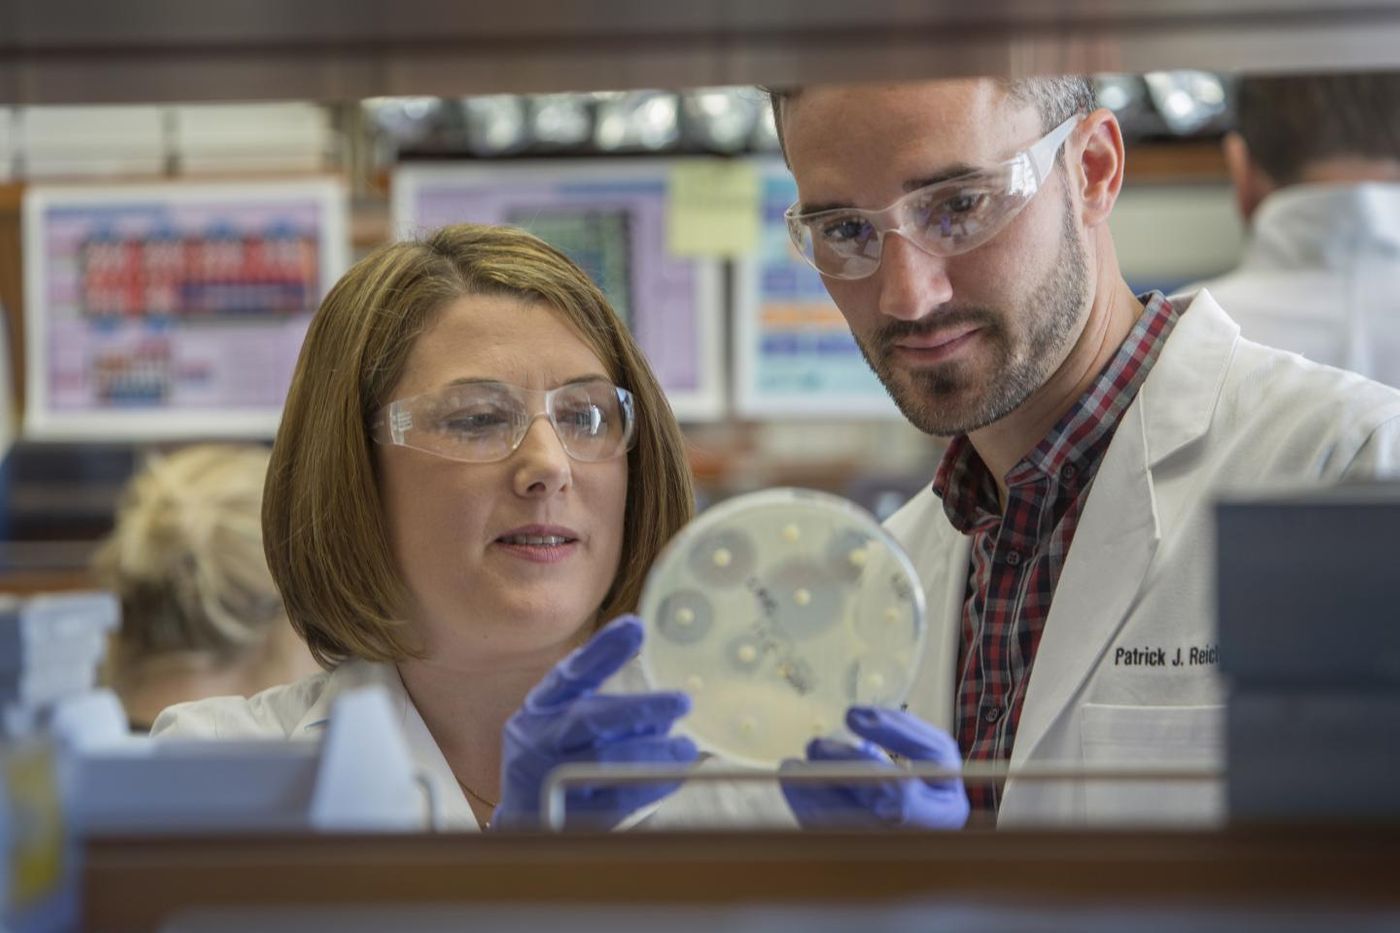 New research sheds light on how MRSA is introduced into households and how it can spread among family members. Shown are the study's senior author, Stephanie A. Fritz, MD, (left) and co-author Patrick Hogan. / Credit: Washington University School of Medicine